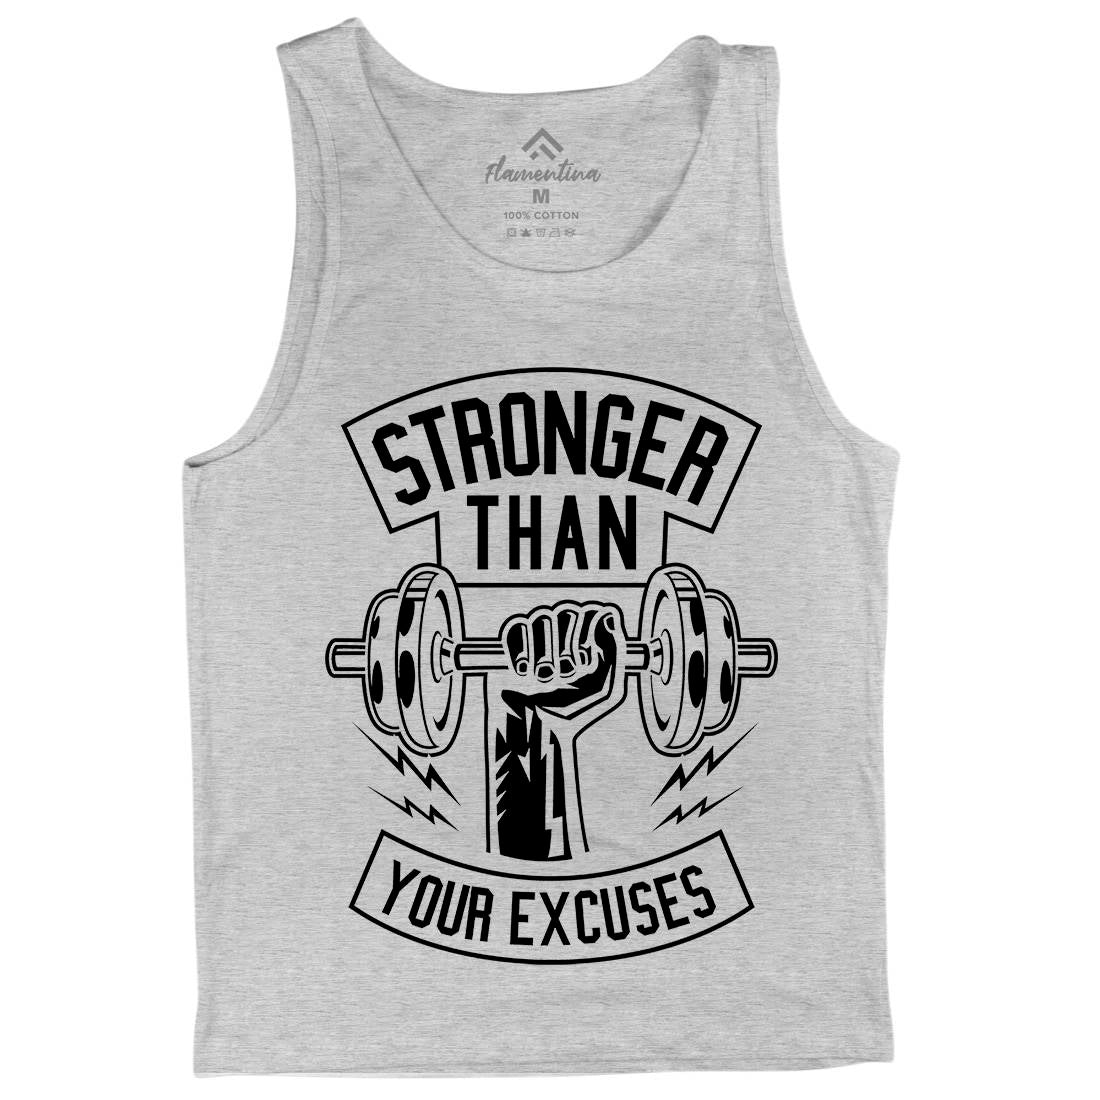 Stronger Than Your Excuses Mens Tank Top Vest Gym B644